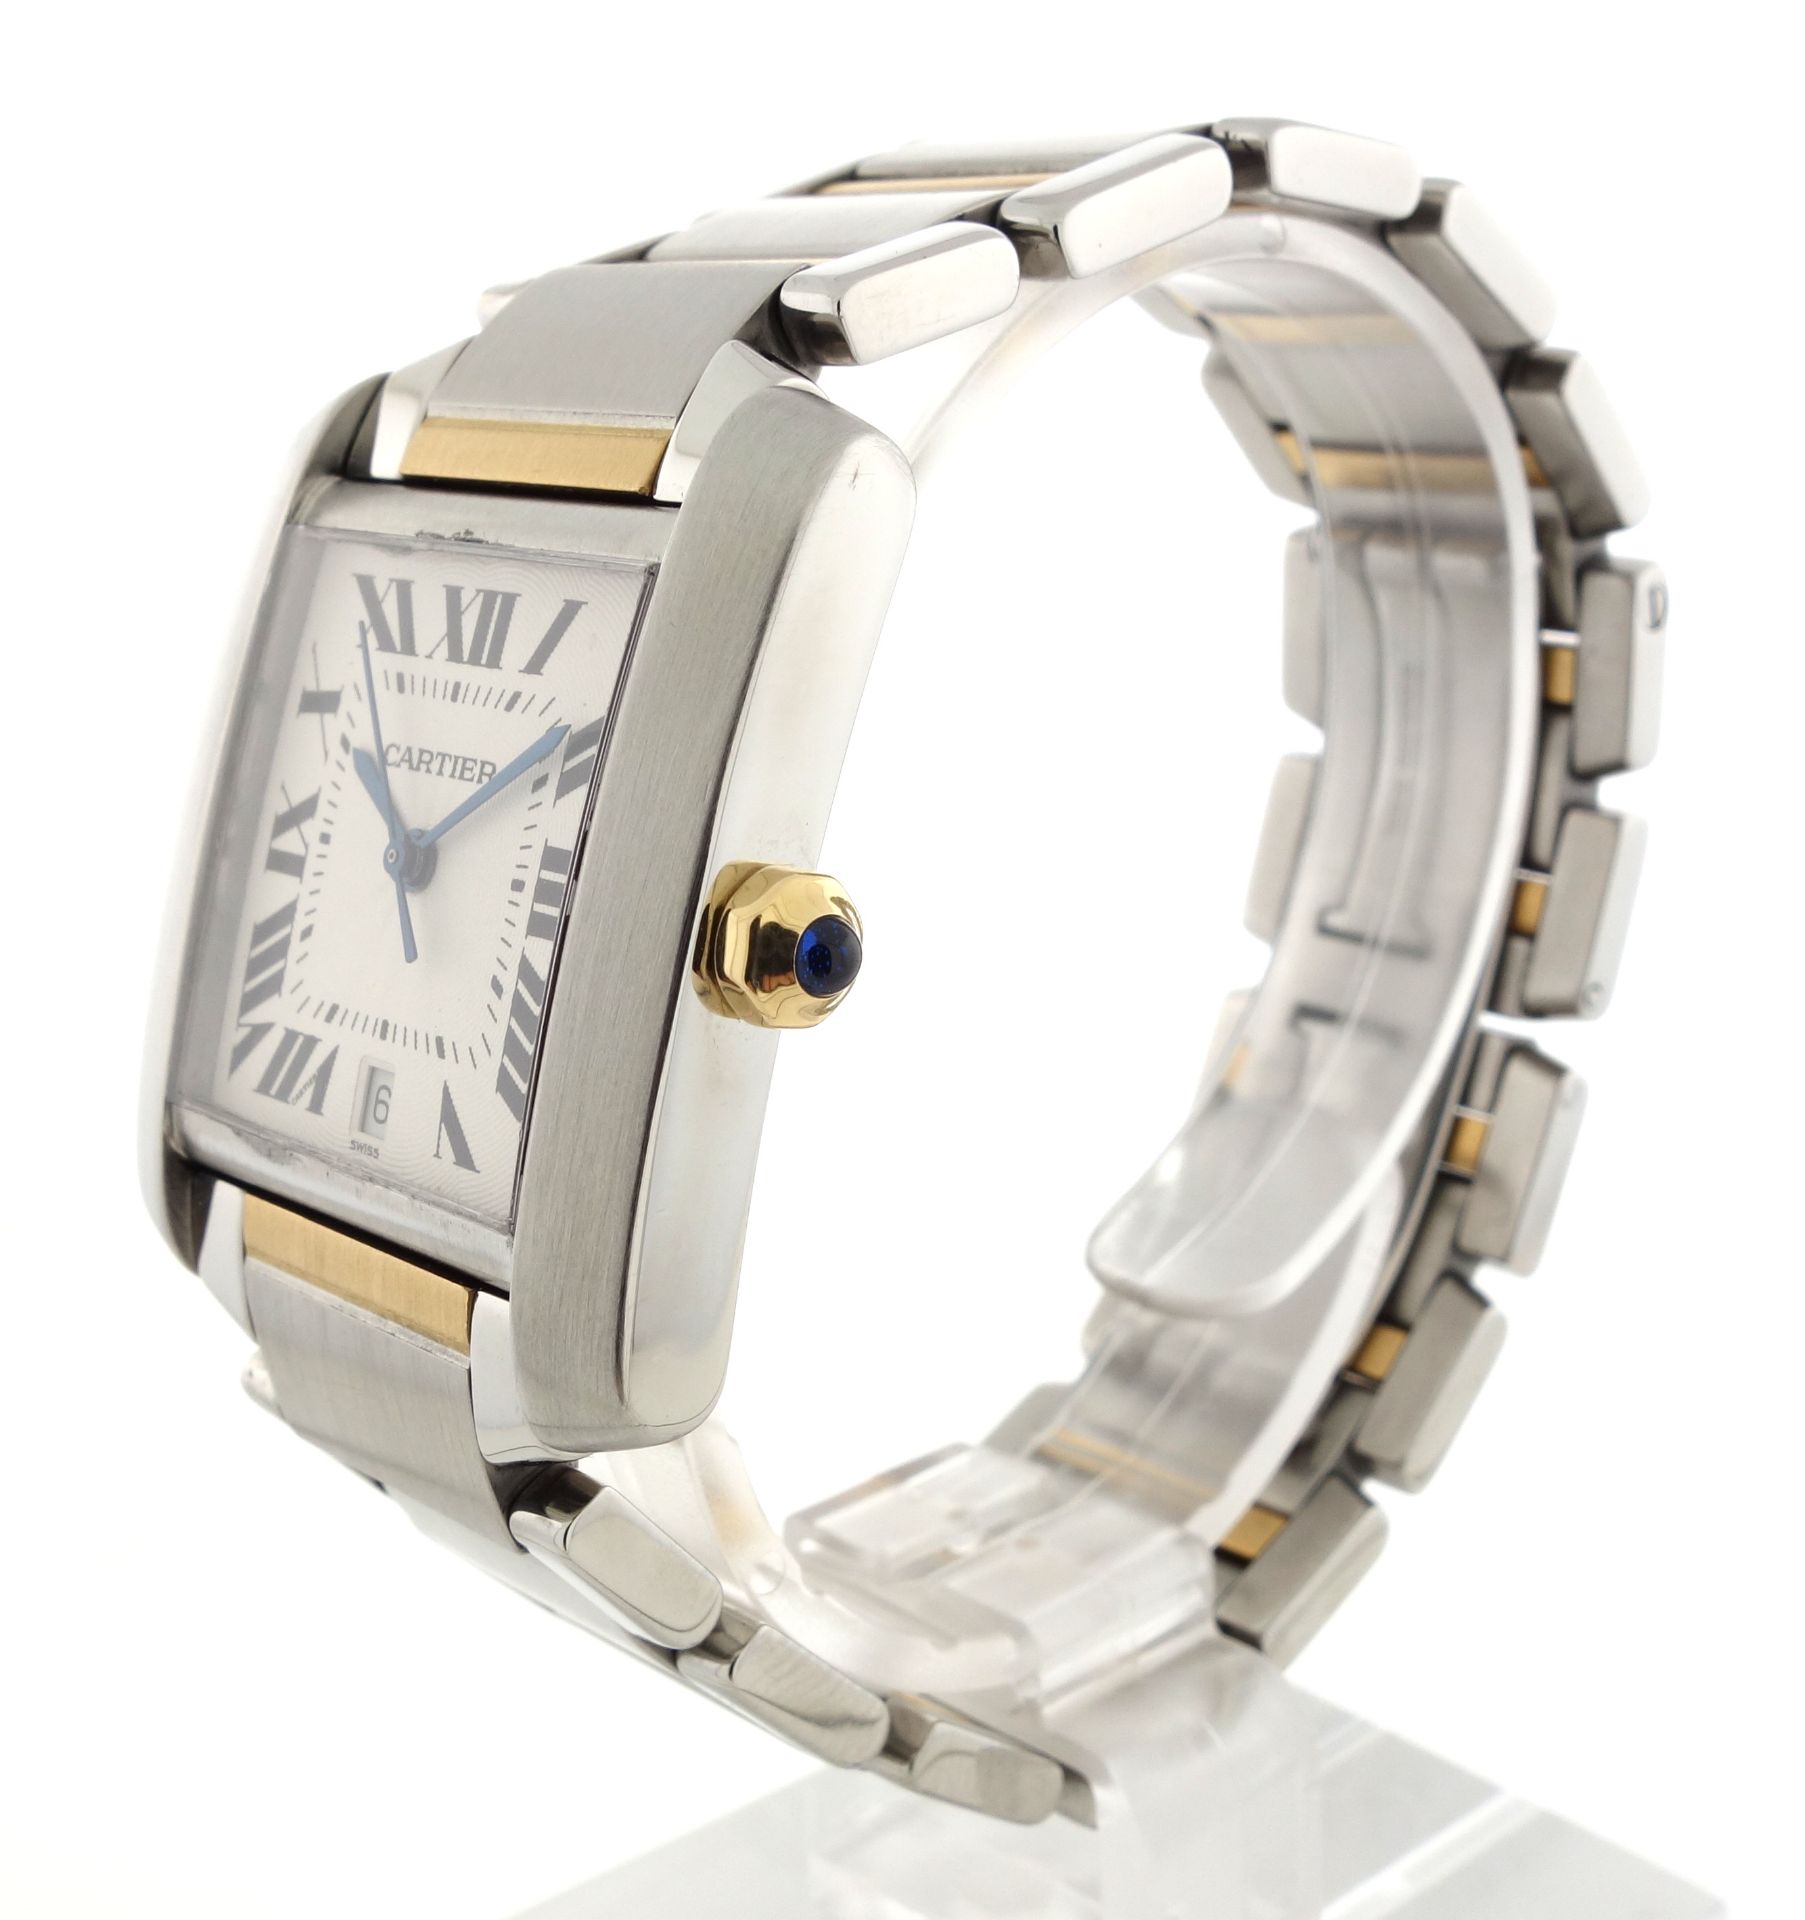 Gents Cartier Tank Francaise – 2302 - Image 2 of 4